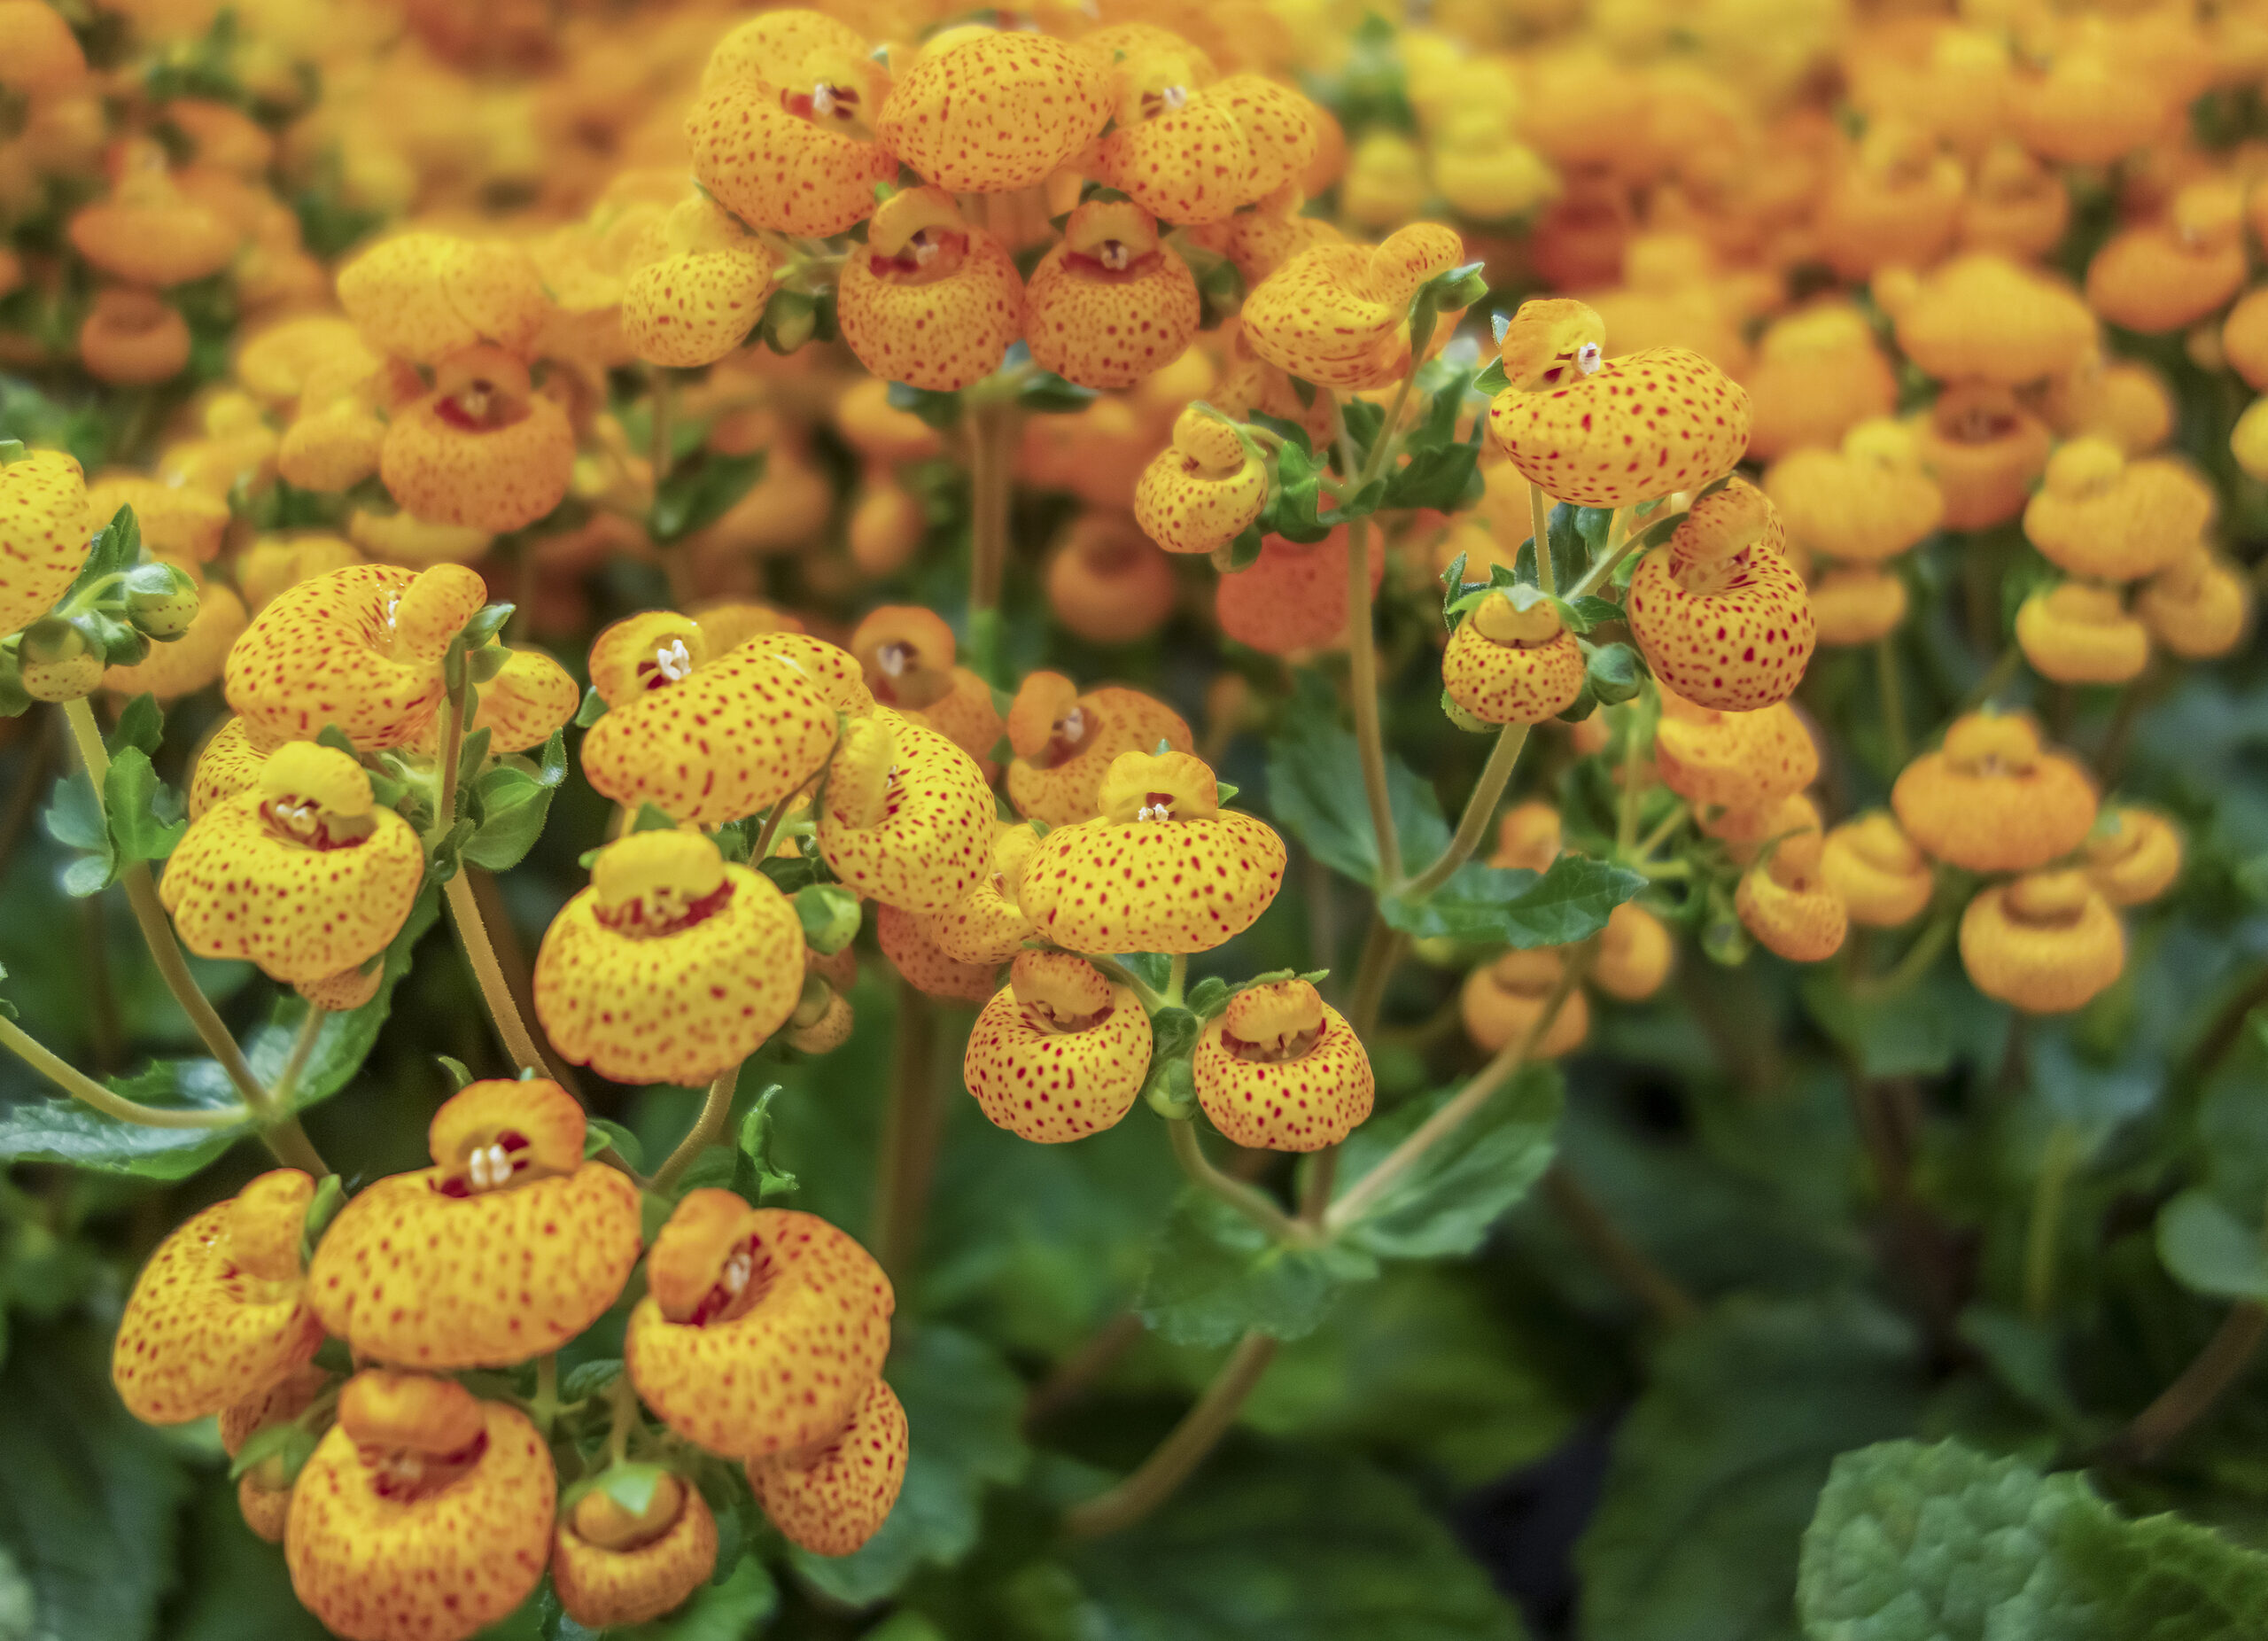 Calceolaria, Lady's Purse, Slipper Flower, Pocketbook Flower, Slipperwort.  Ornamental Yellow Hybrid For Gardens, Parks. CLose Up Stock Photo, Picture  and Royalty Free Image. Image 124811517.